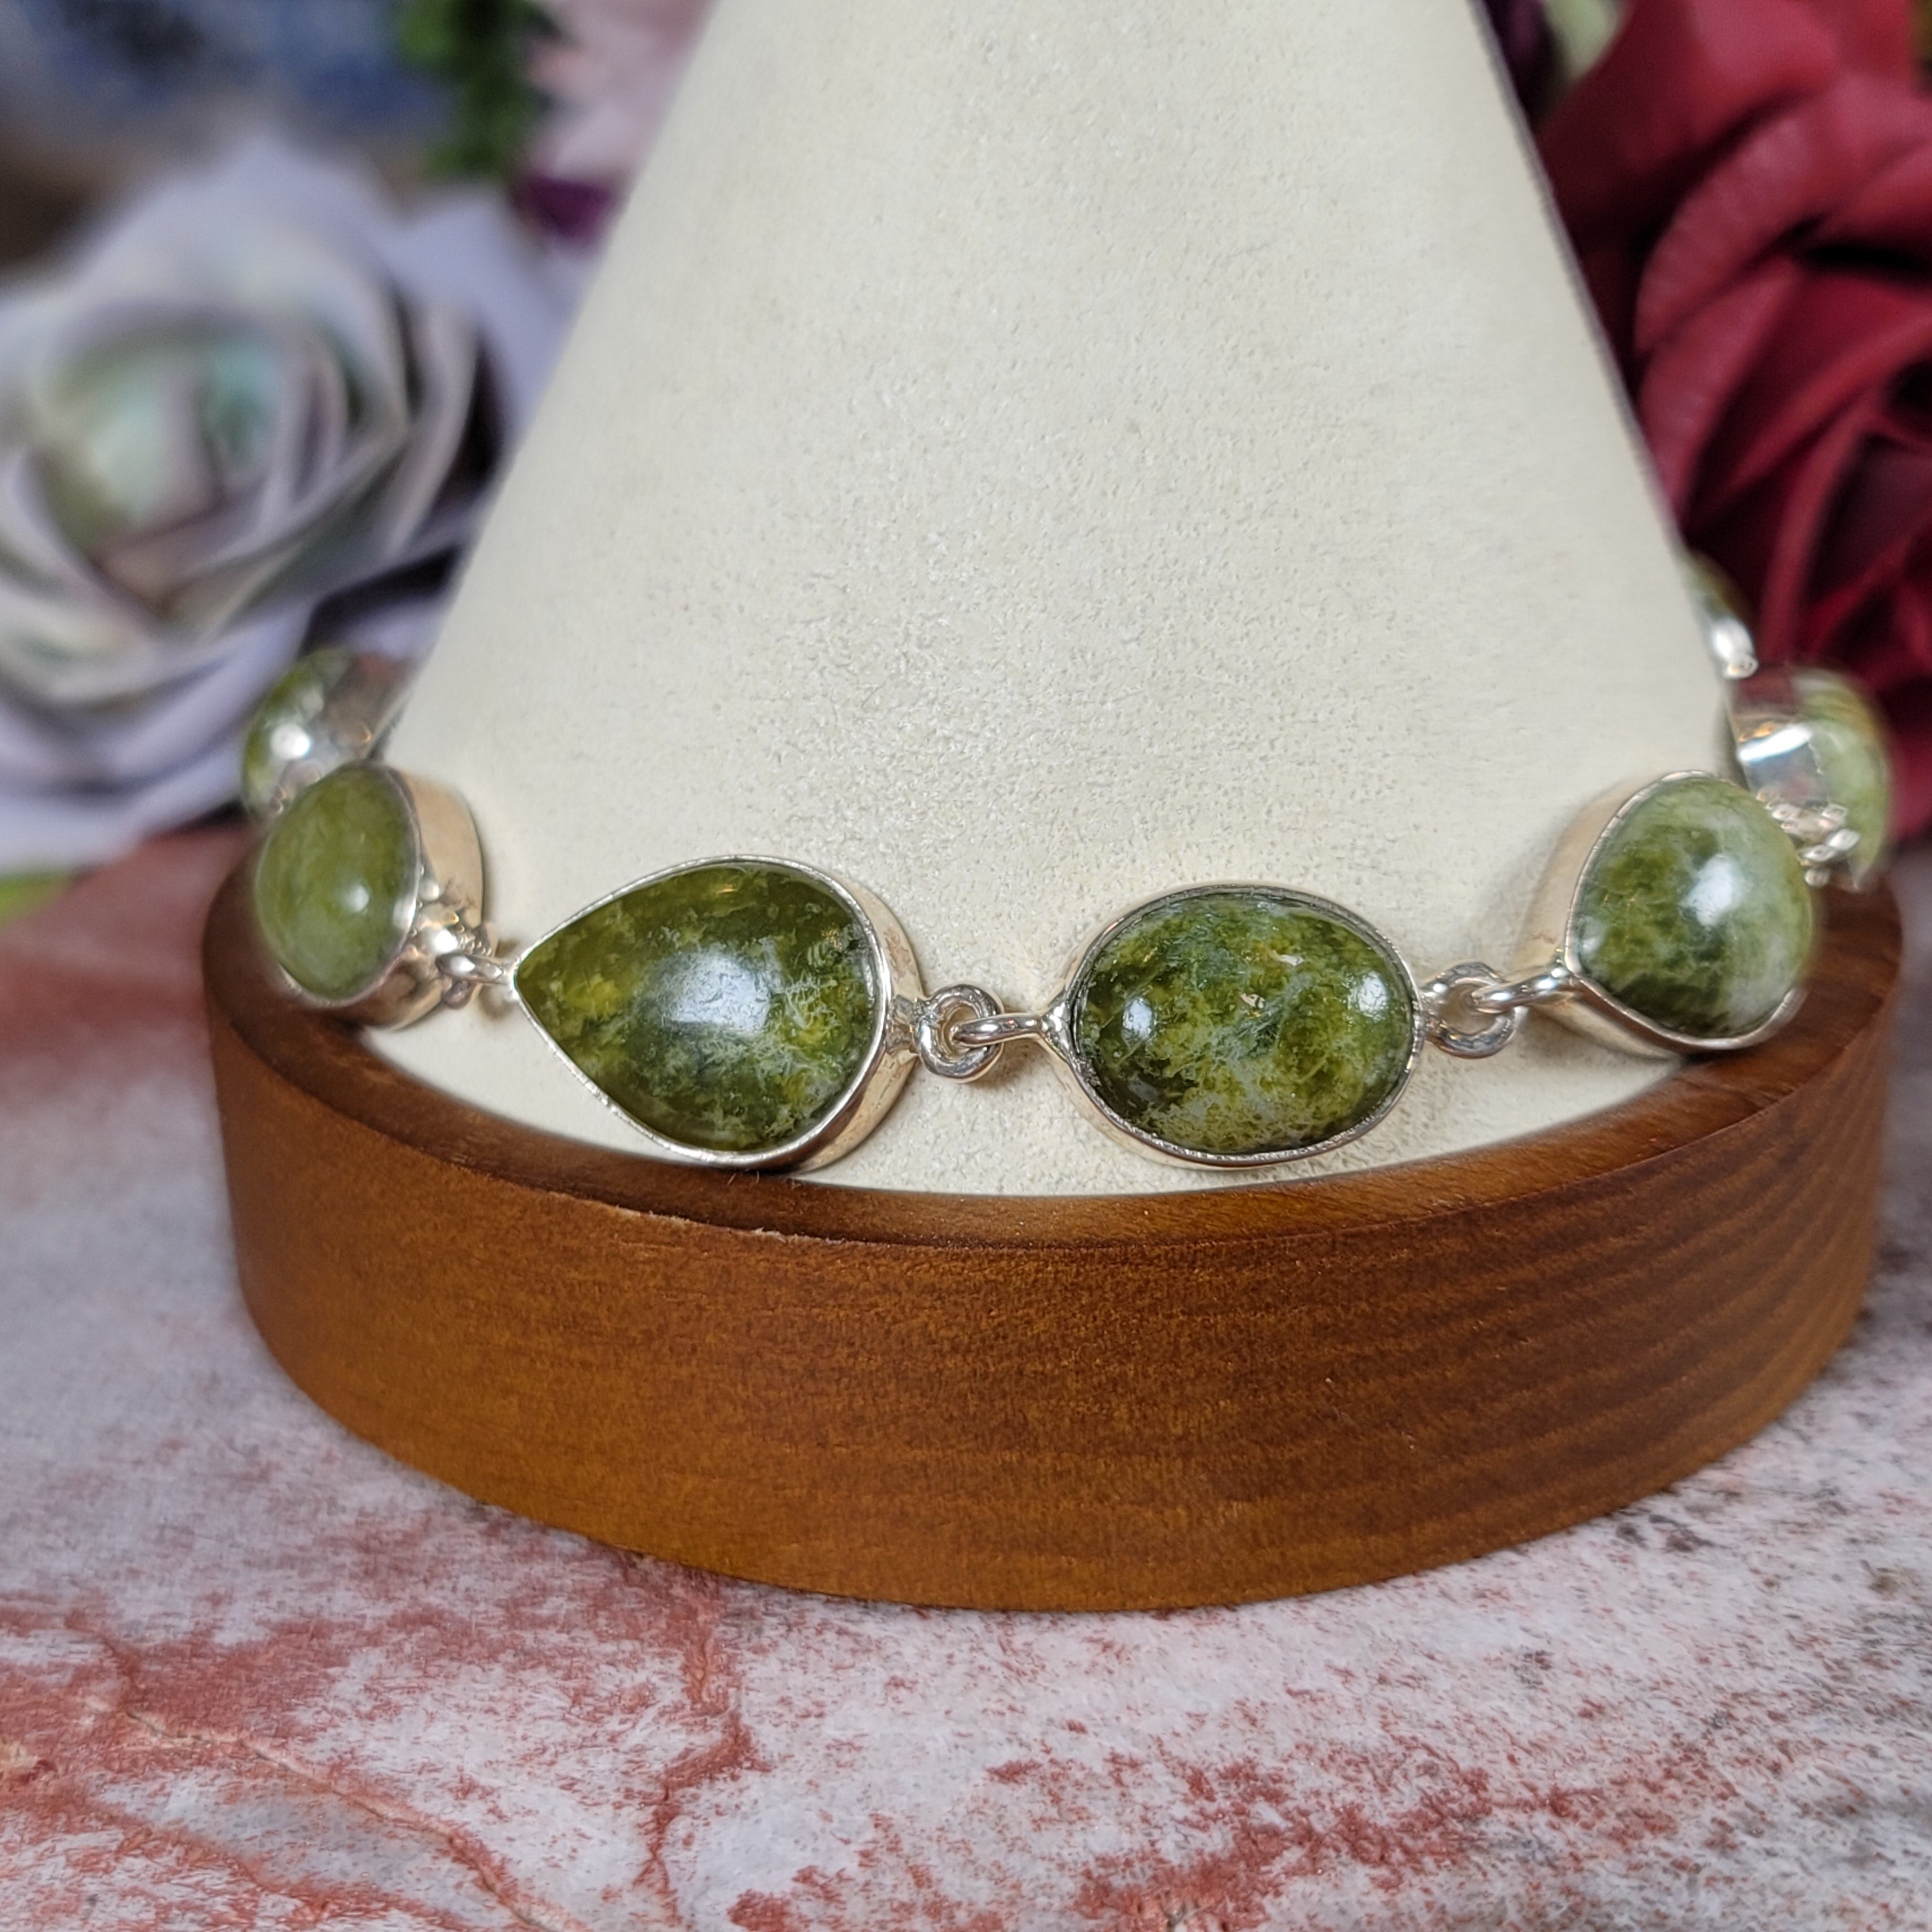 Vesuvianite Bracelet .925 Silver for Courage, Growth and Change